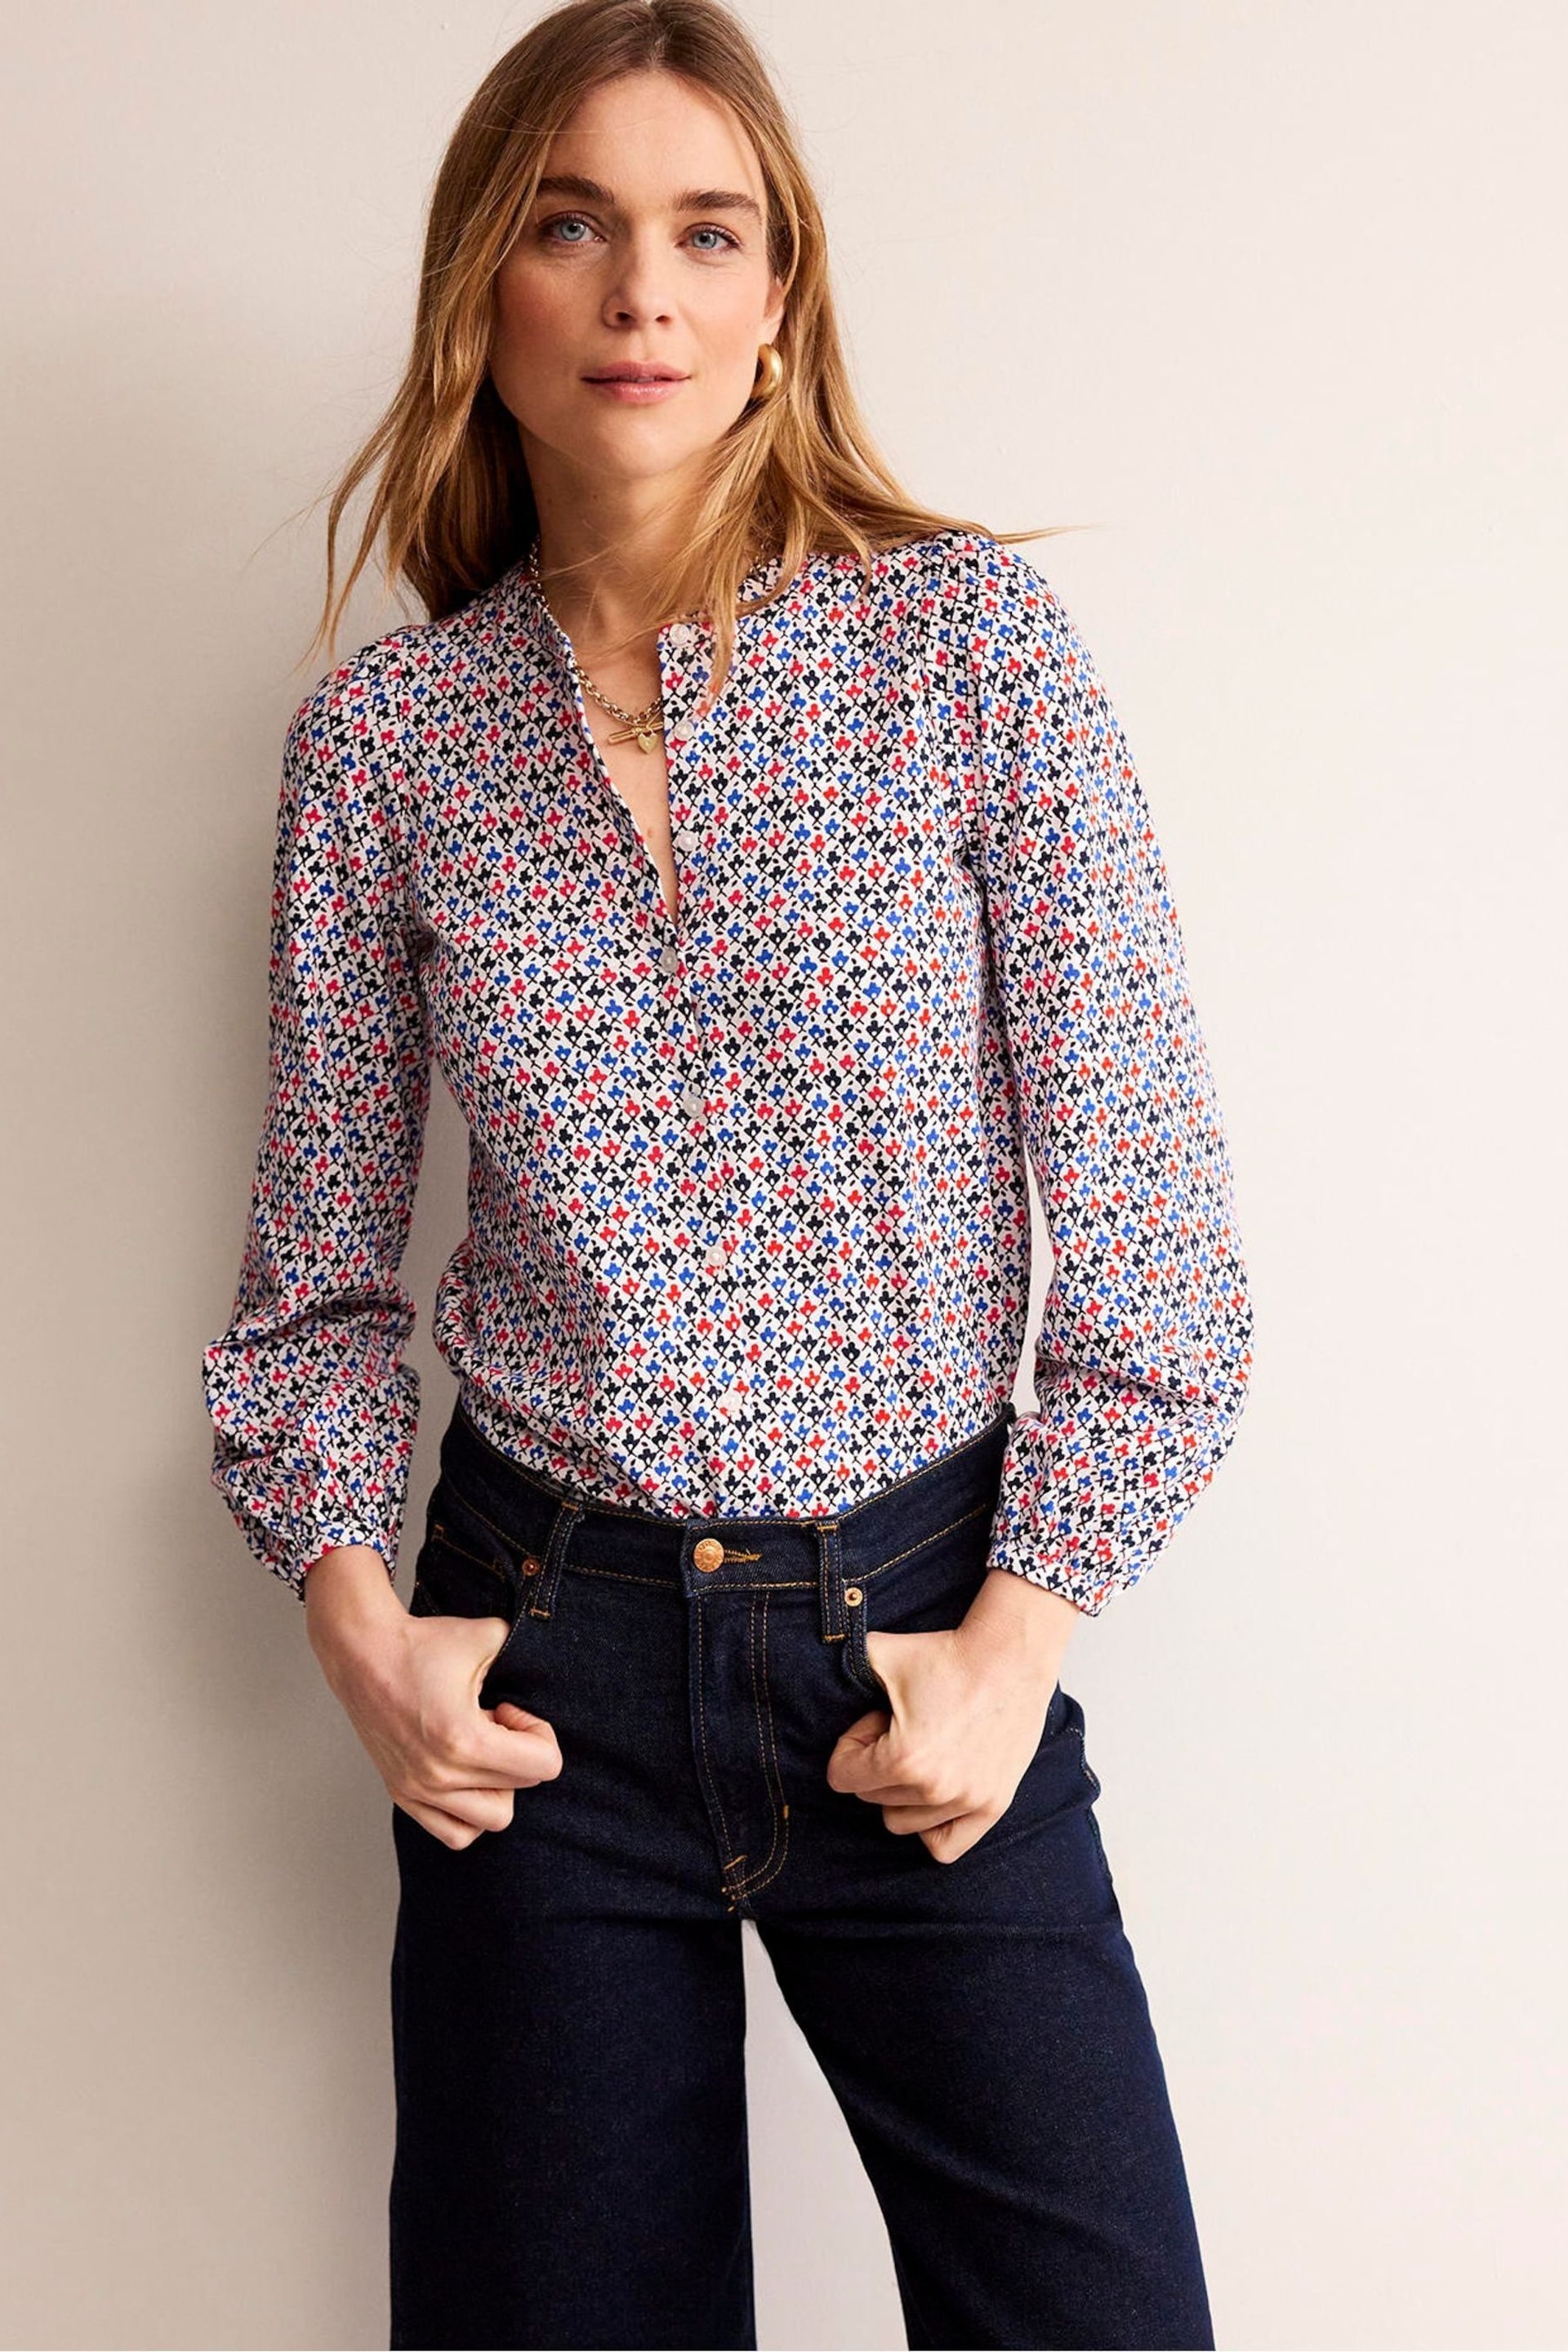 Boden Pink Marina Embroidered Shirt - Image 1 of 5